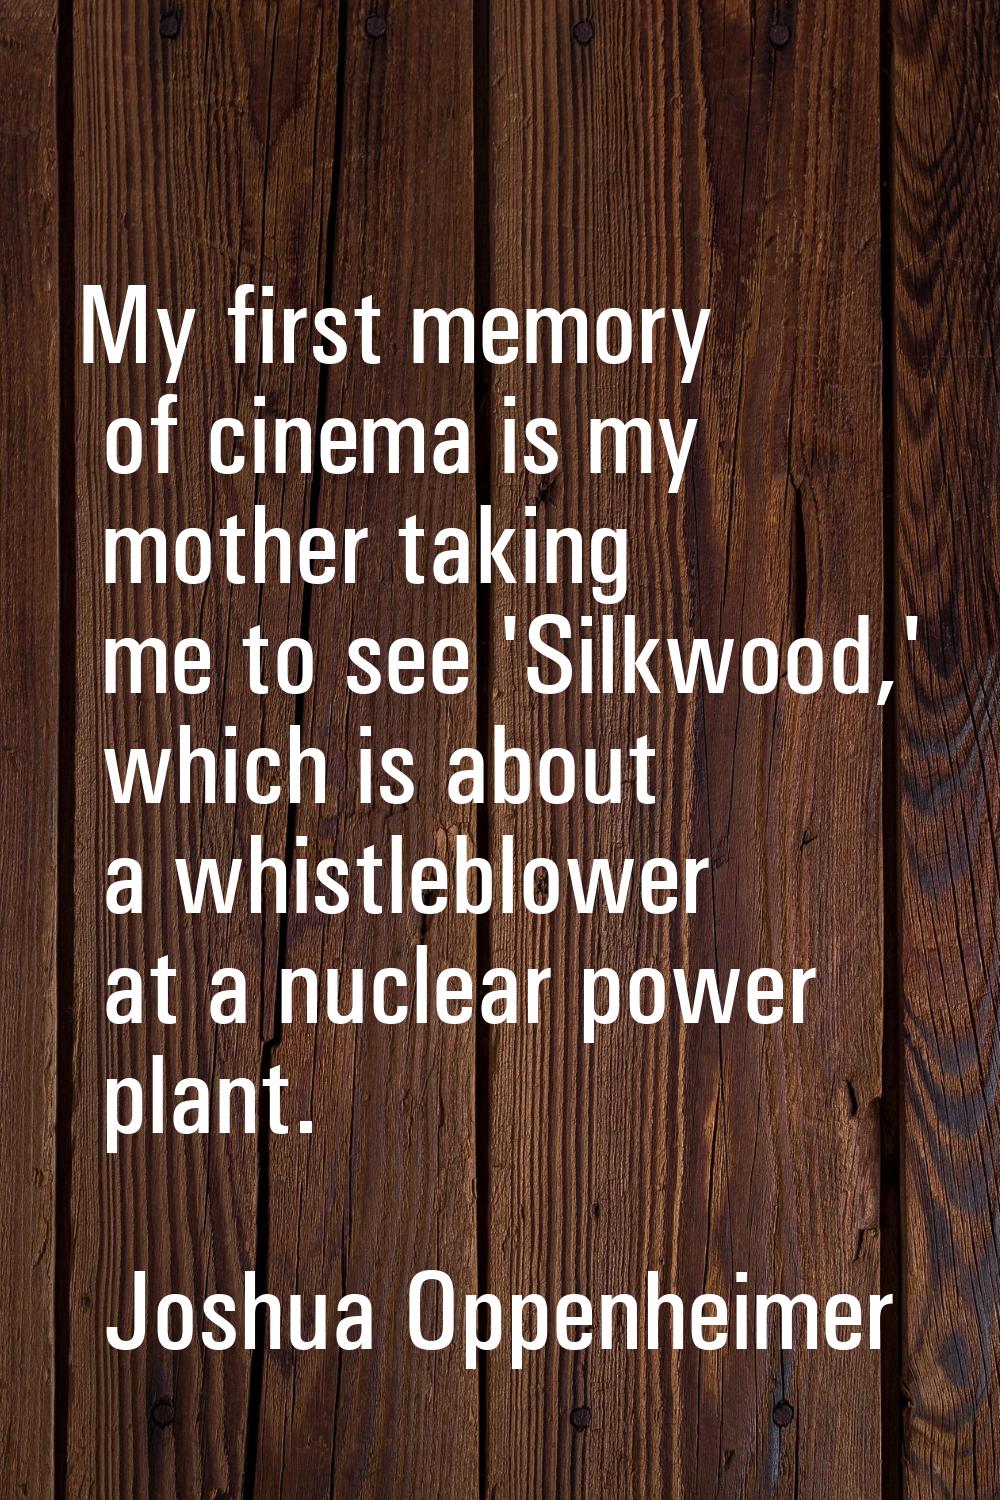 My first memory of cinema is my mother taking me to see 'Silkwood,' which is about a whistleblower 